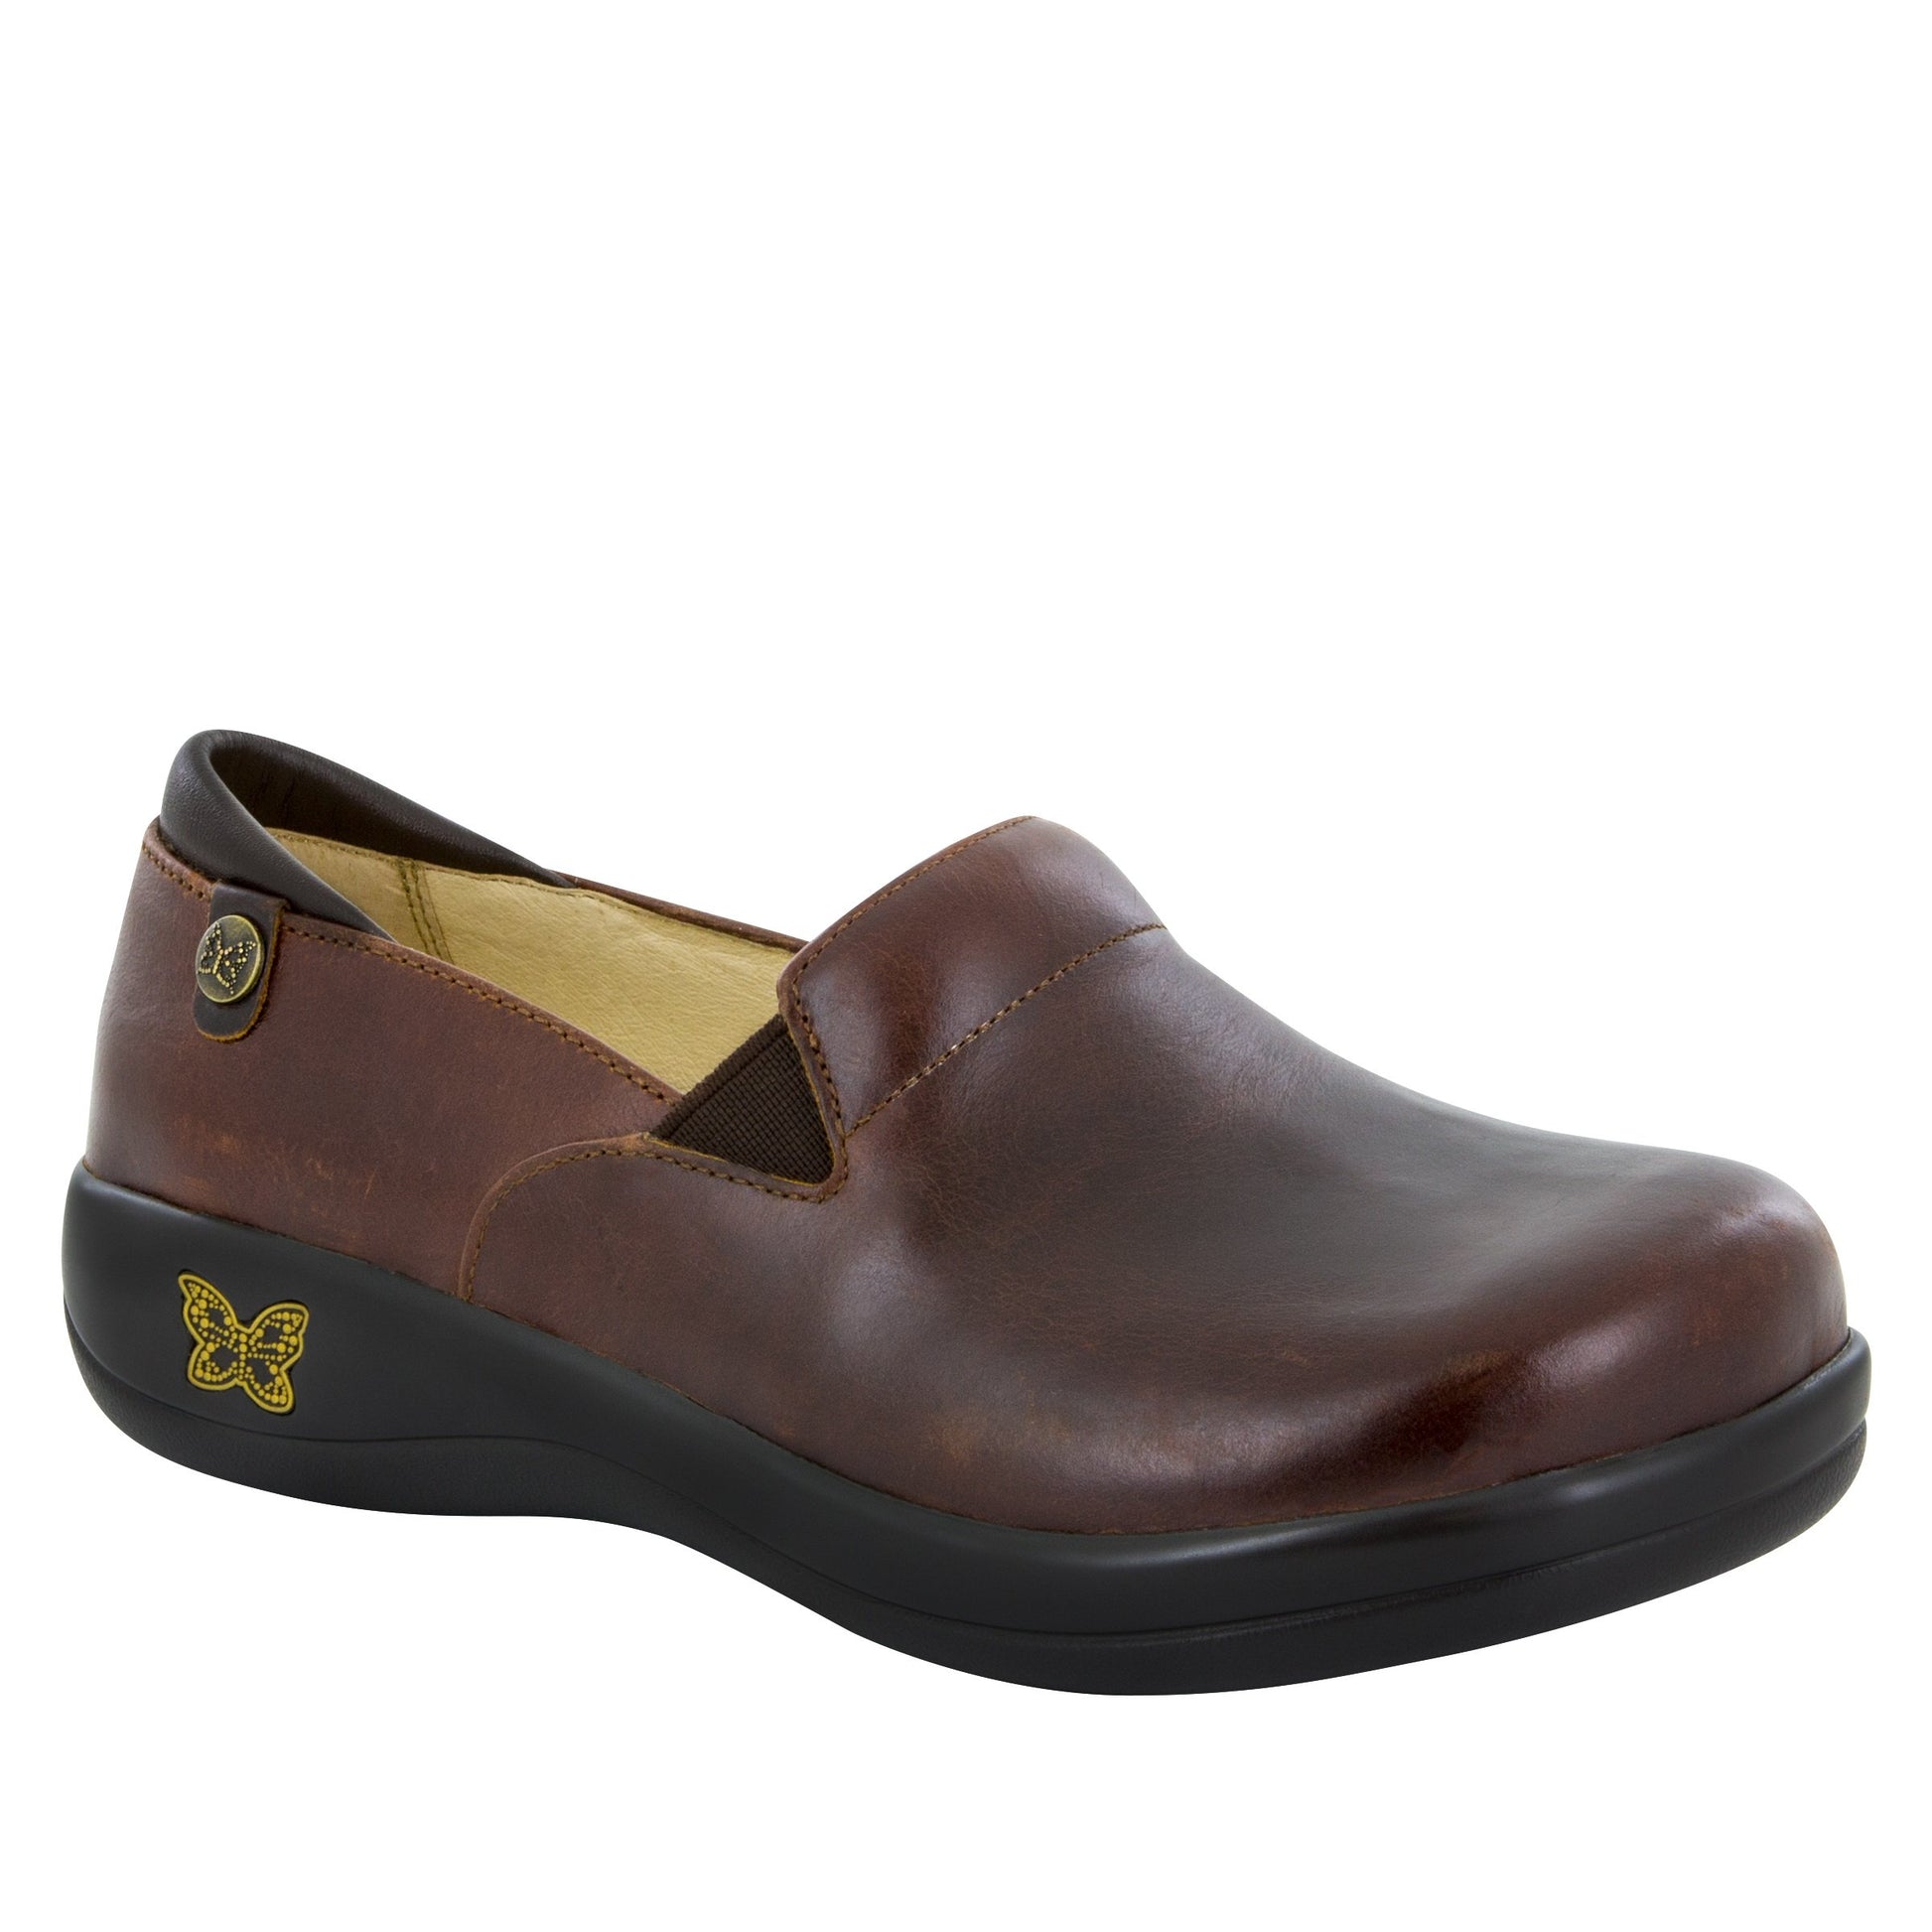 Alegria Sale Shoe Size 36Keli Professional in Hickory at Parker's Clothing and Shoes.